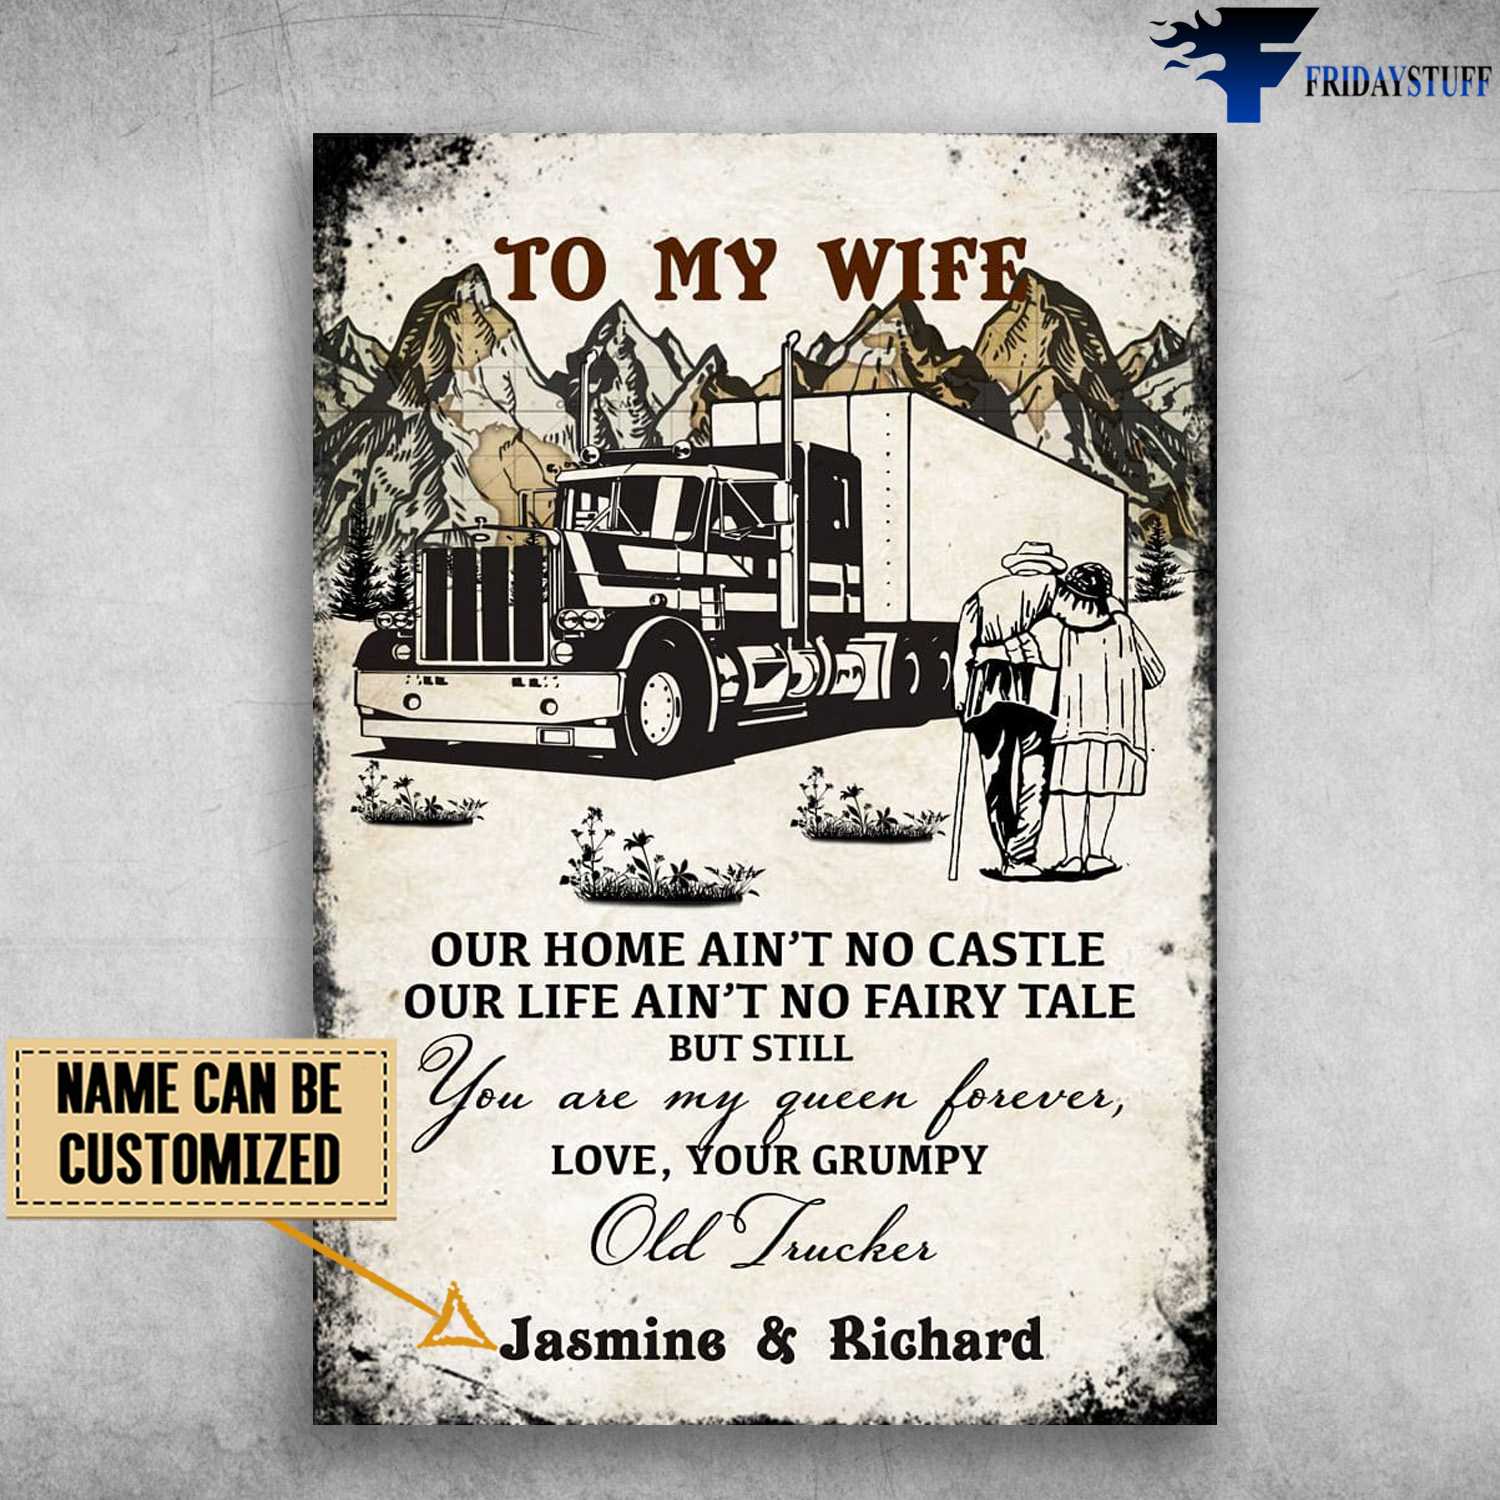 Trucker Gift, Old Couple Poster, To My Wife, Our Home Ain't No Castle, Our Life Ain't No Fairy Tale, You Are My Queen Forever